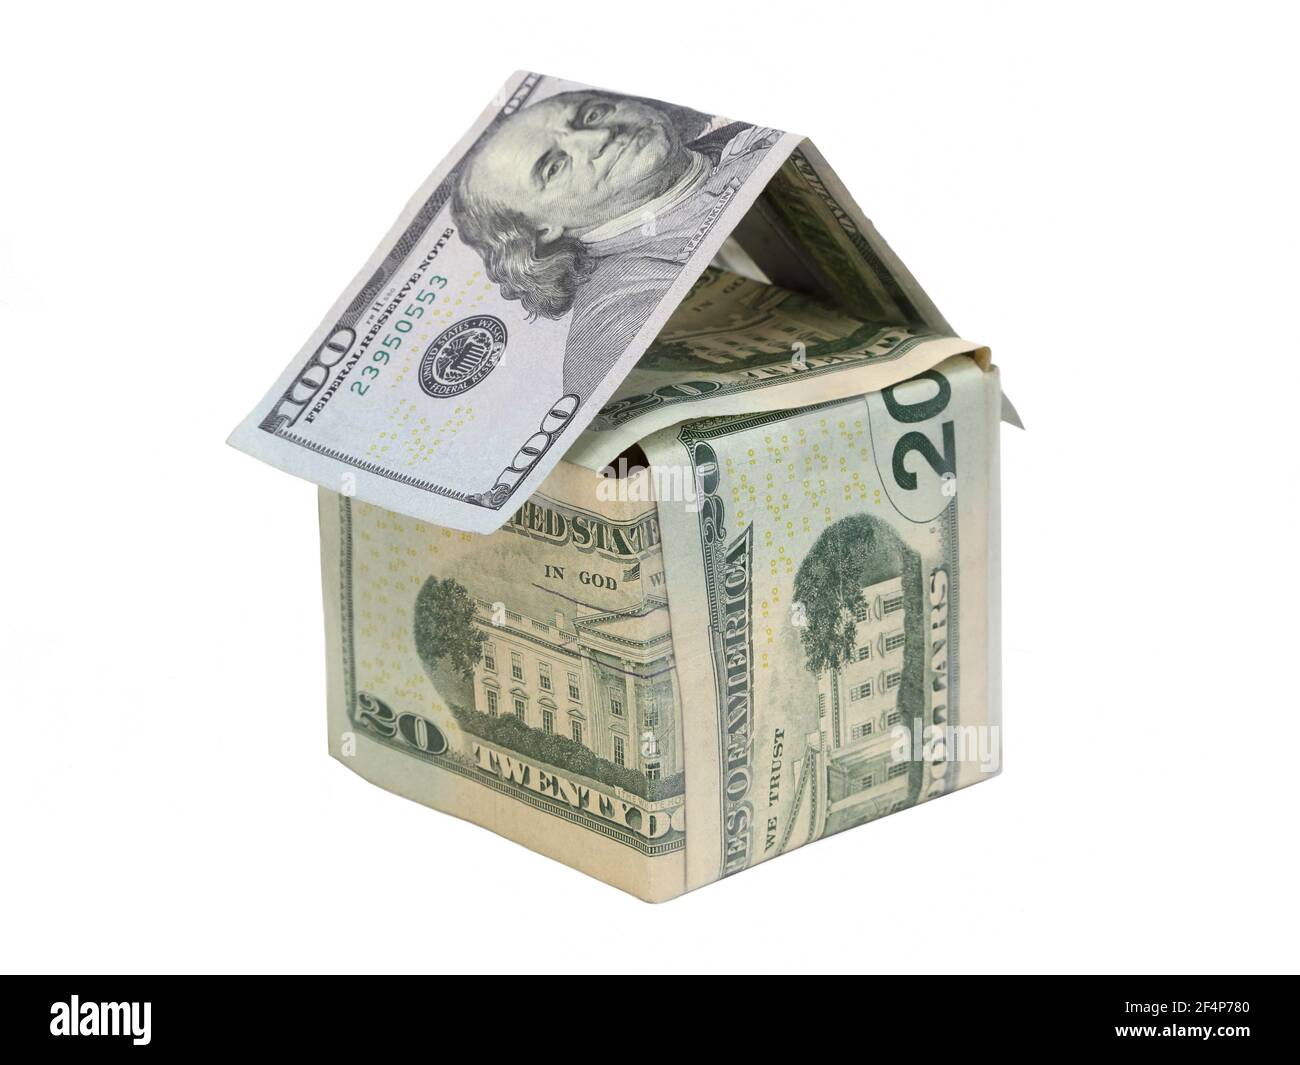 Denominations of USA dollar bills are arranged to represent a small house, demonstrating concepts such as home ownership, work, and personal finances. Stock Photo